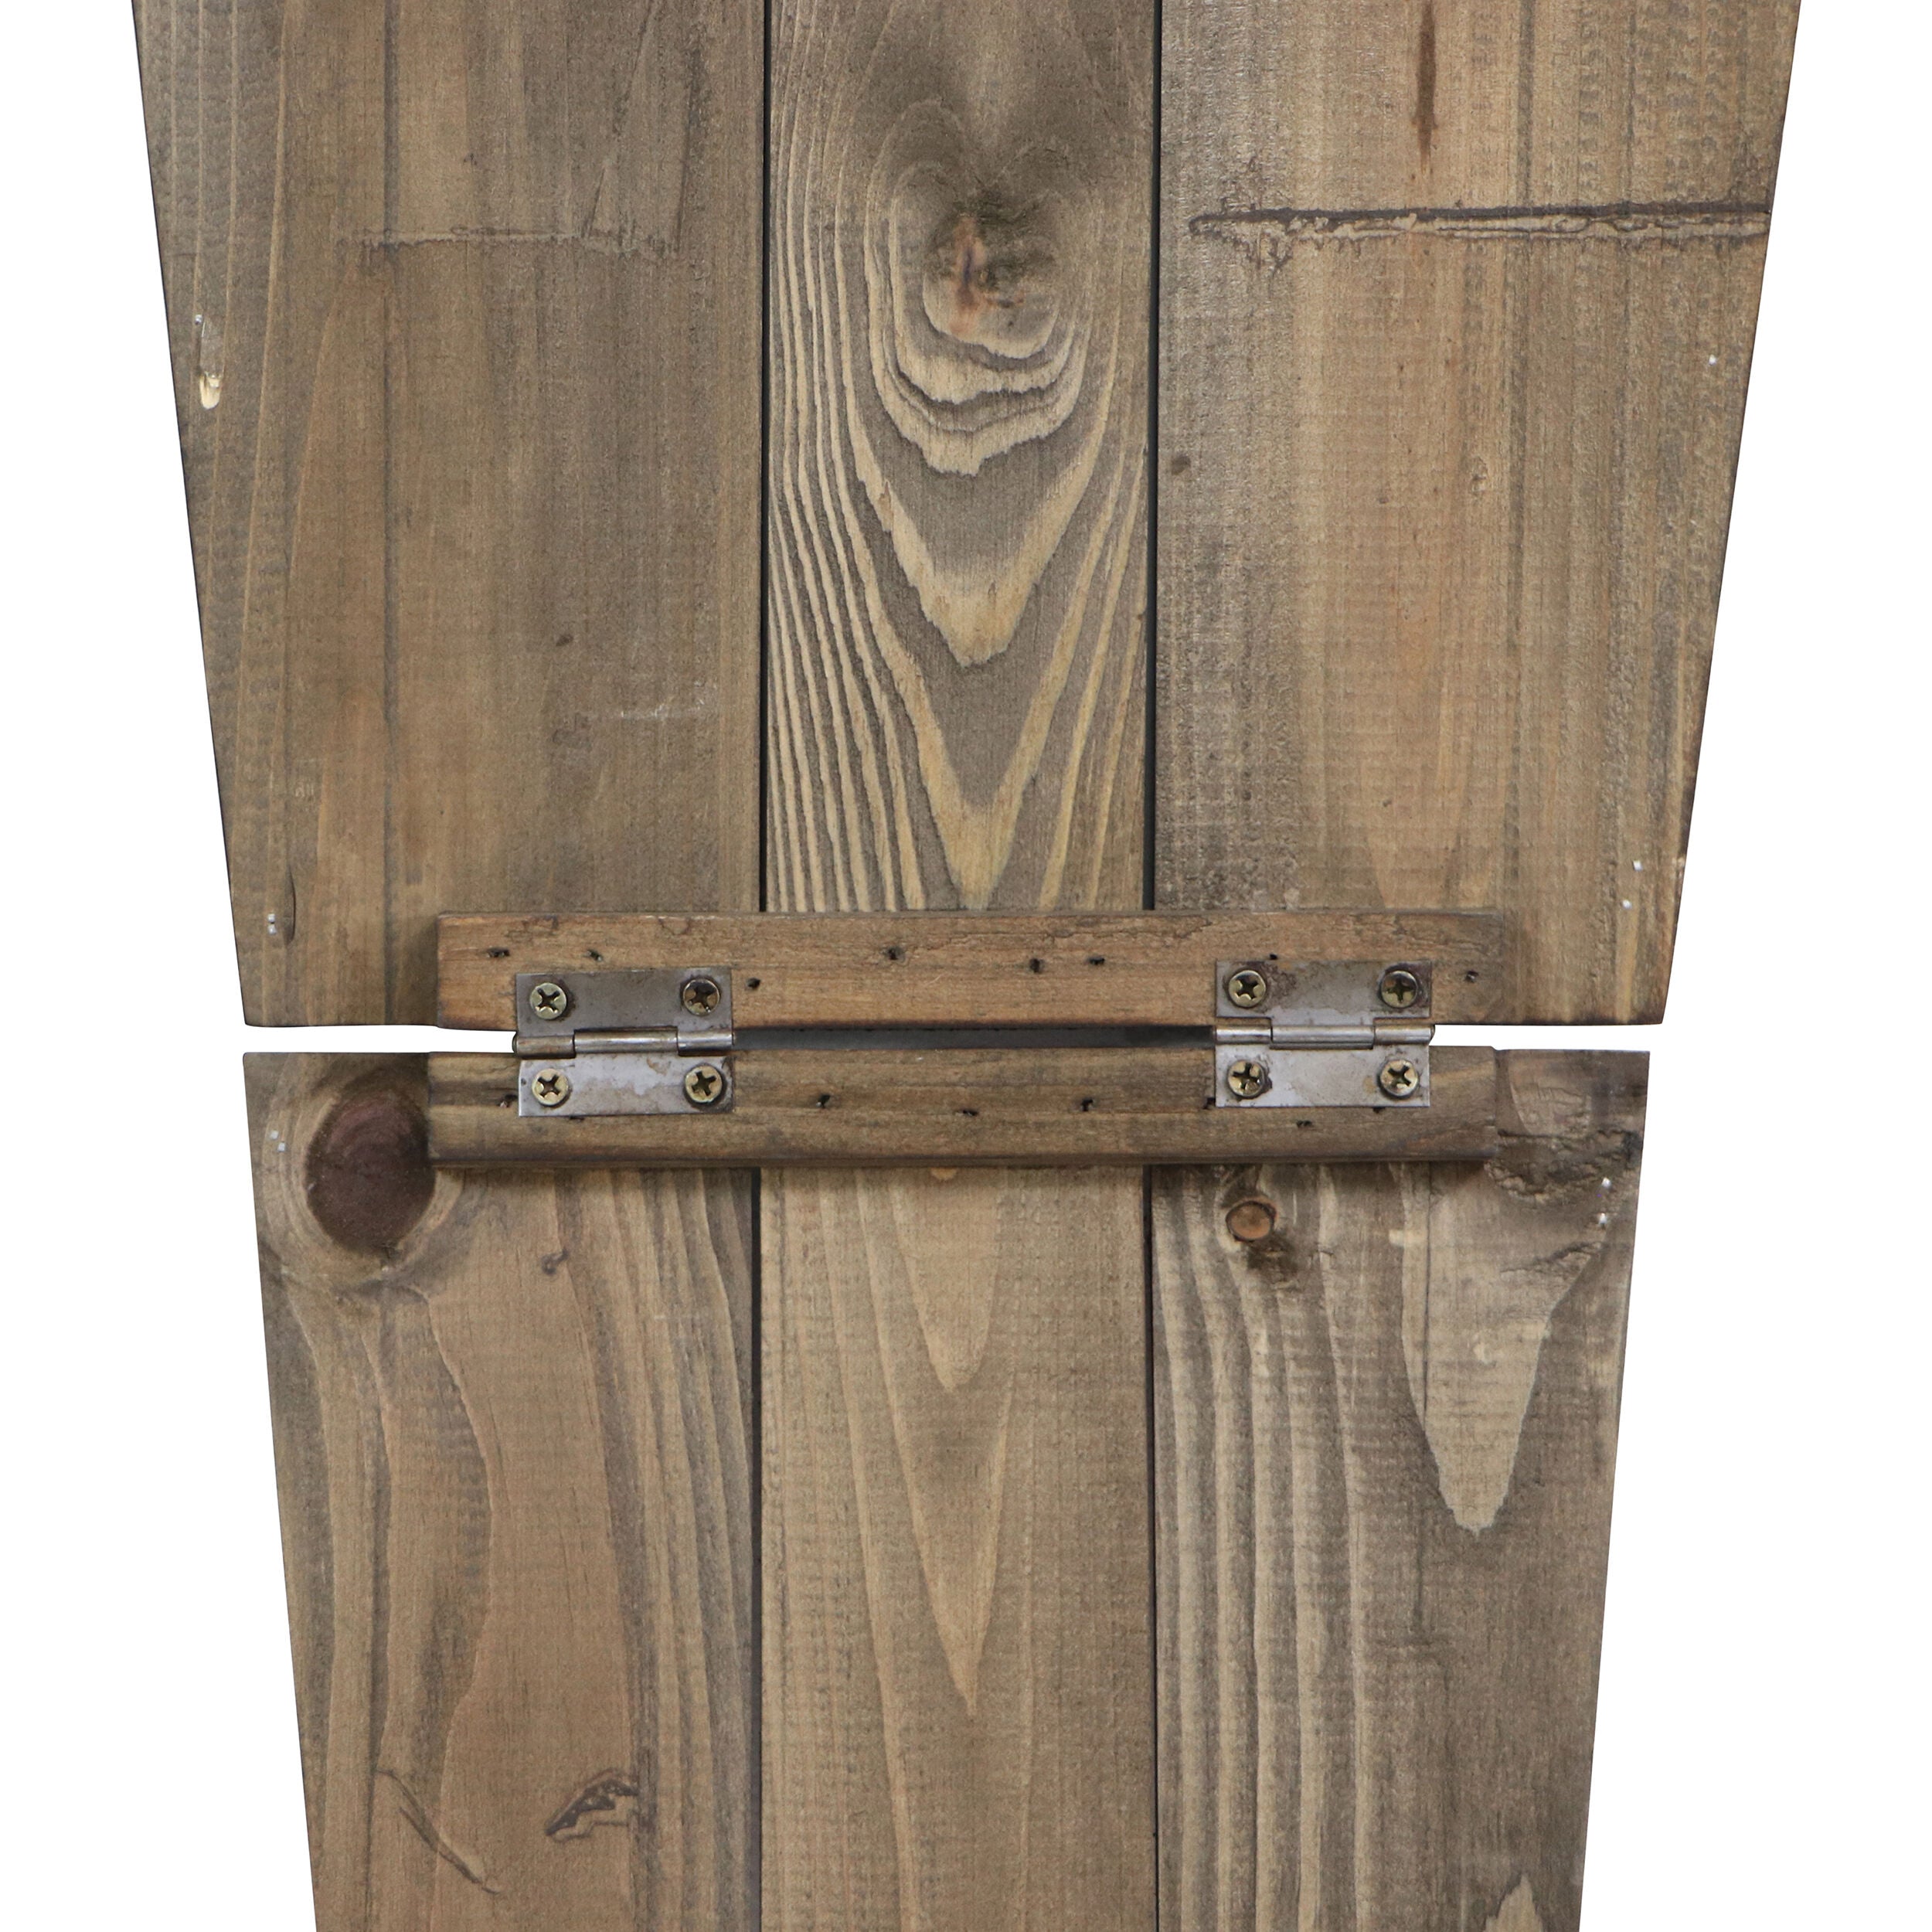 Haunted Hill Farm - 33-In. Wood Coffin Welcome Sign with Folding Storage Hinges for Halloween Hanging Decoration